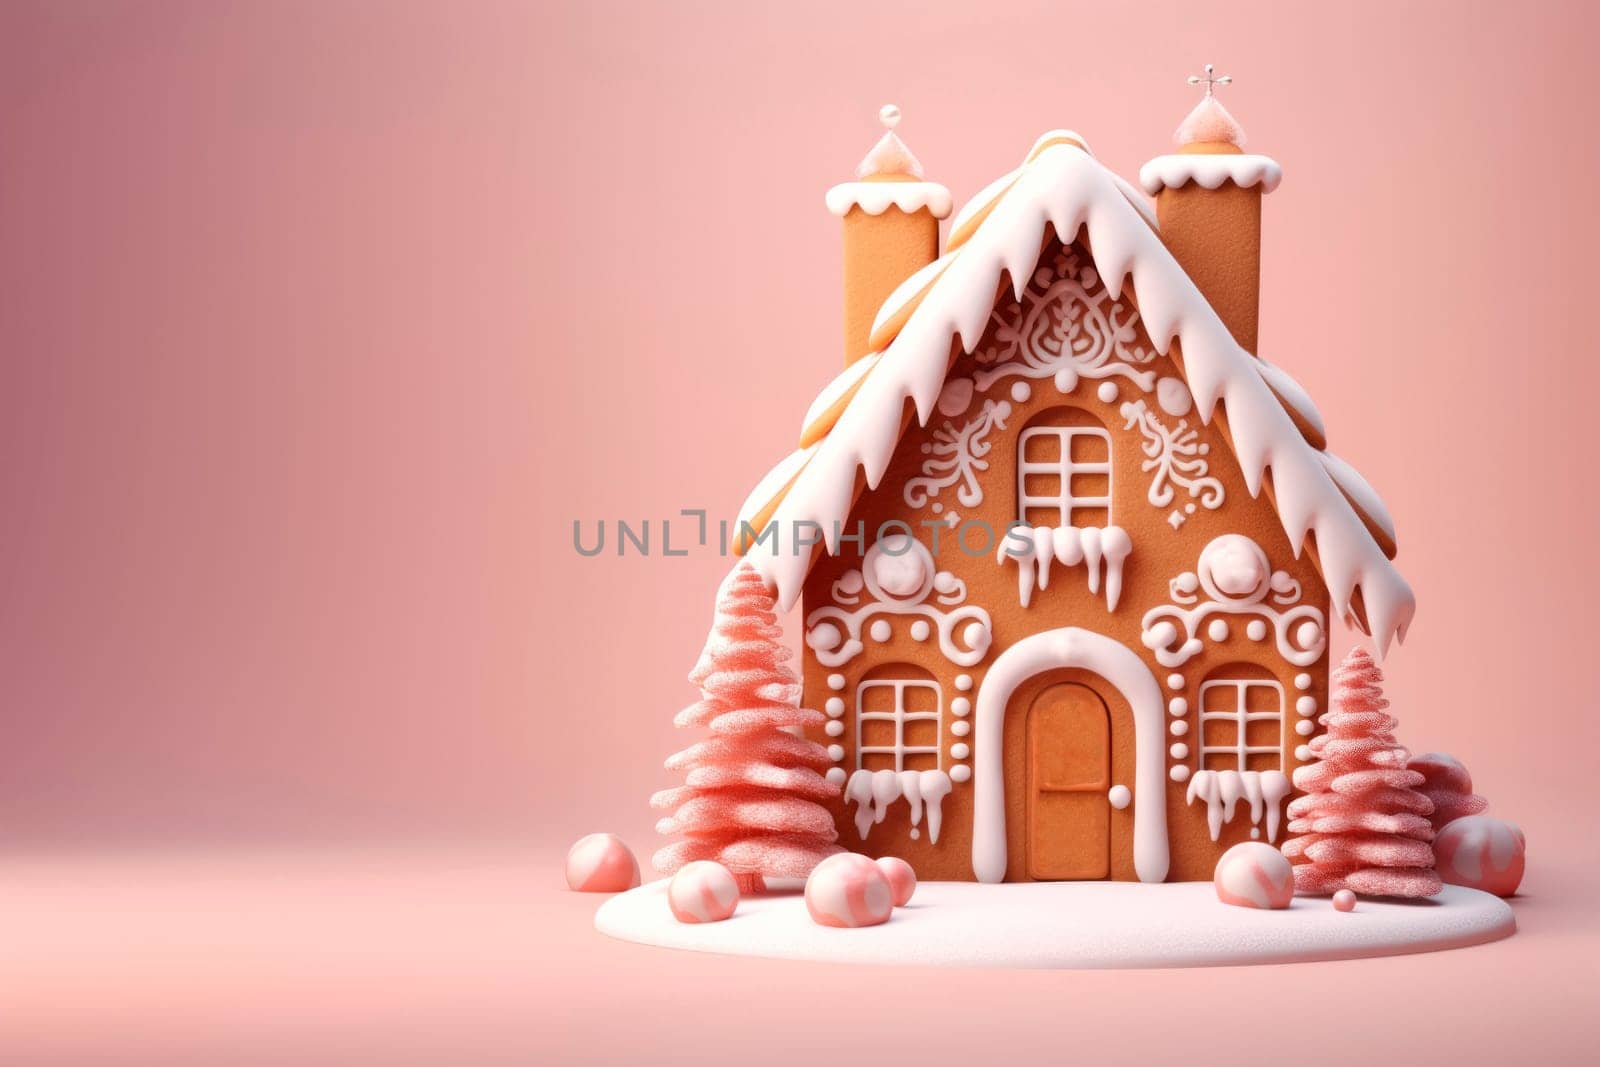 A beautiful gingerbread house on a delicate light background. by Spirina